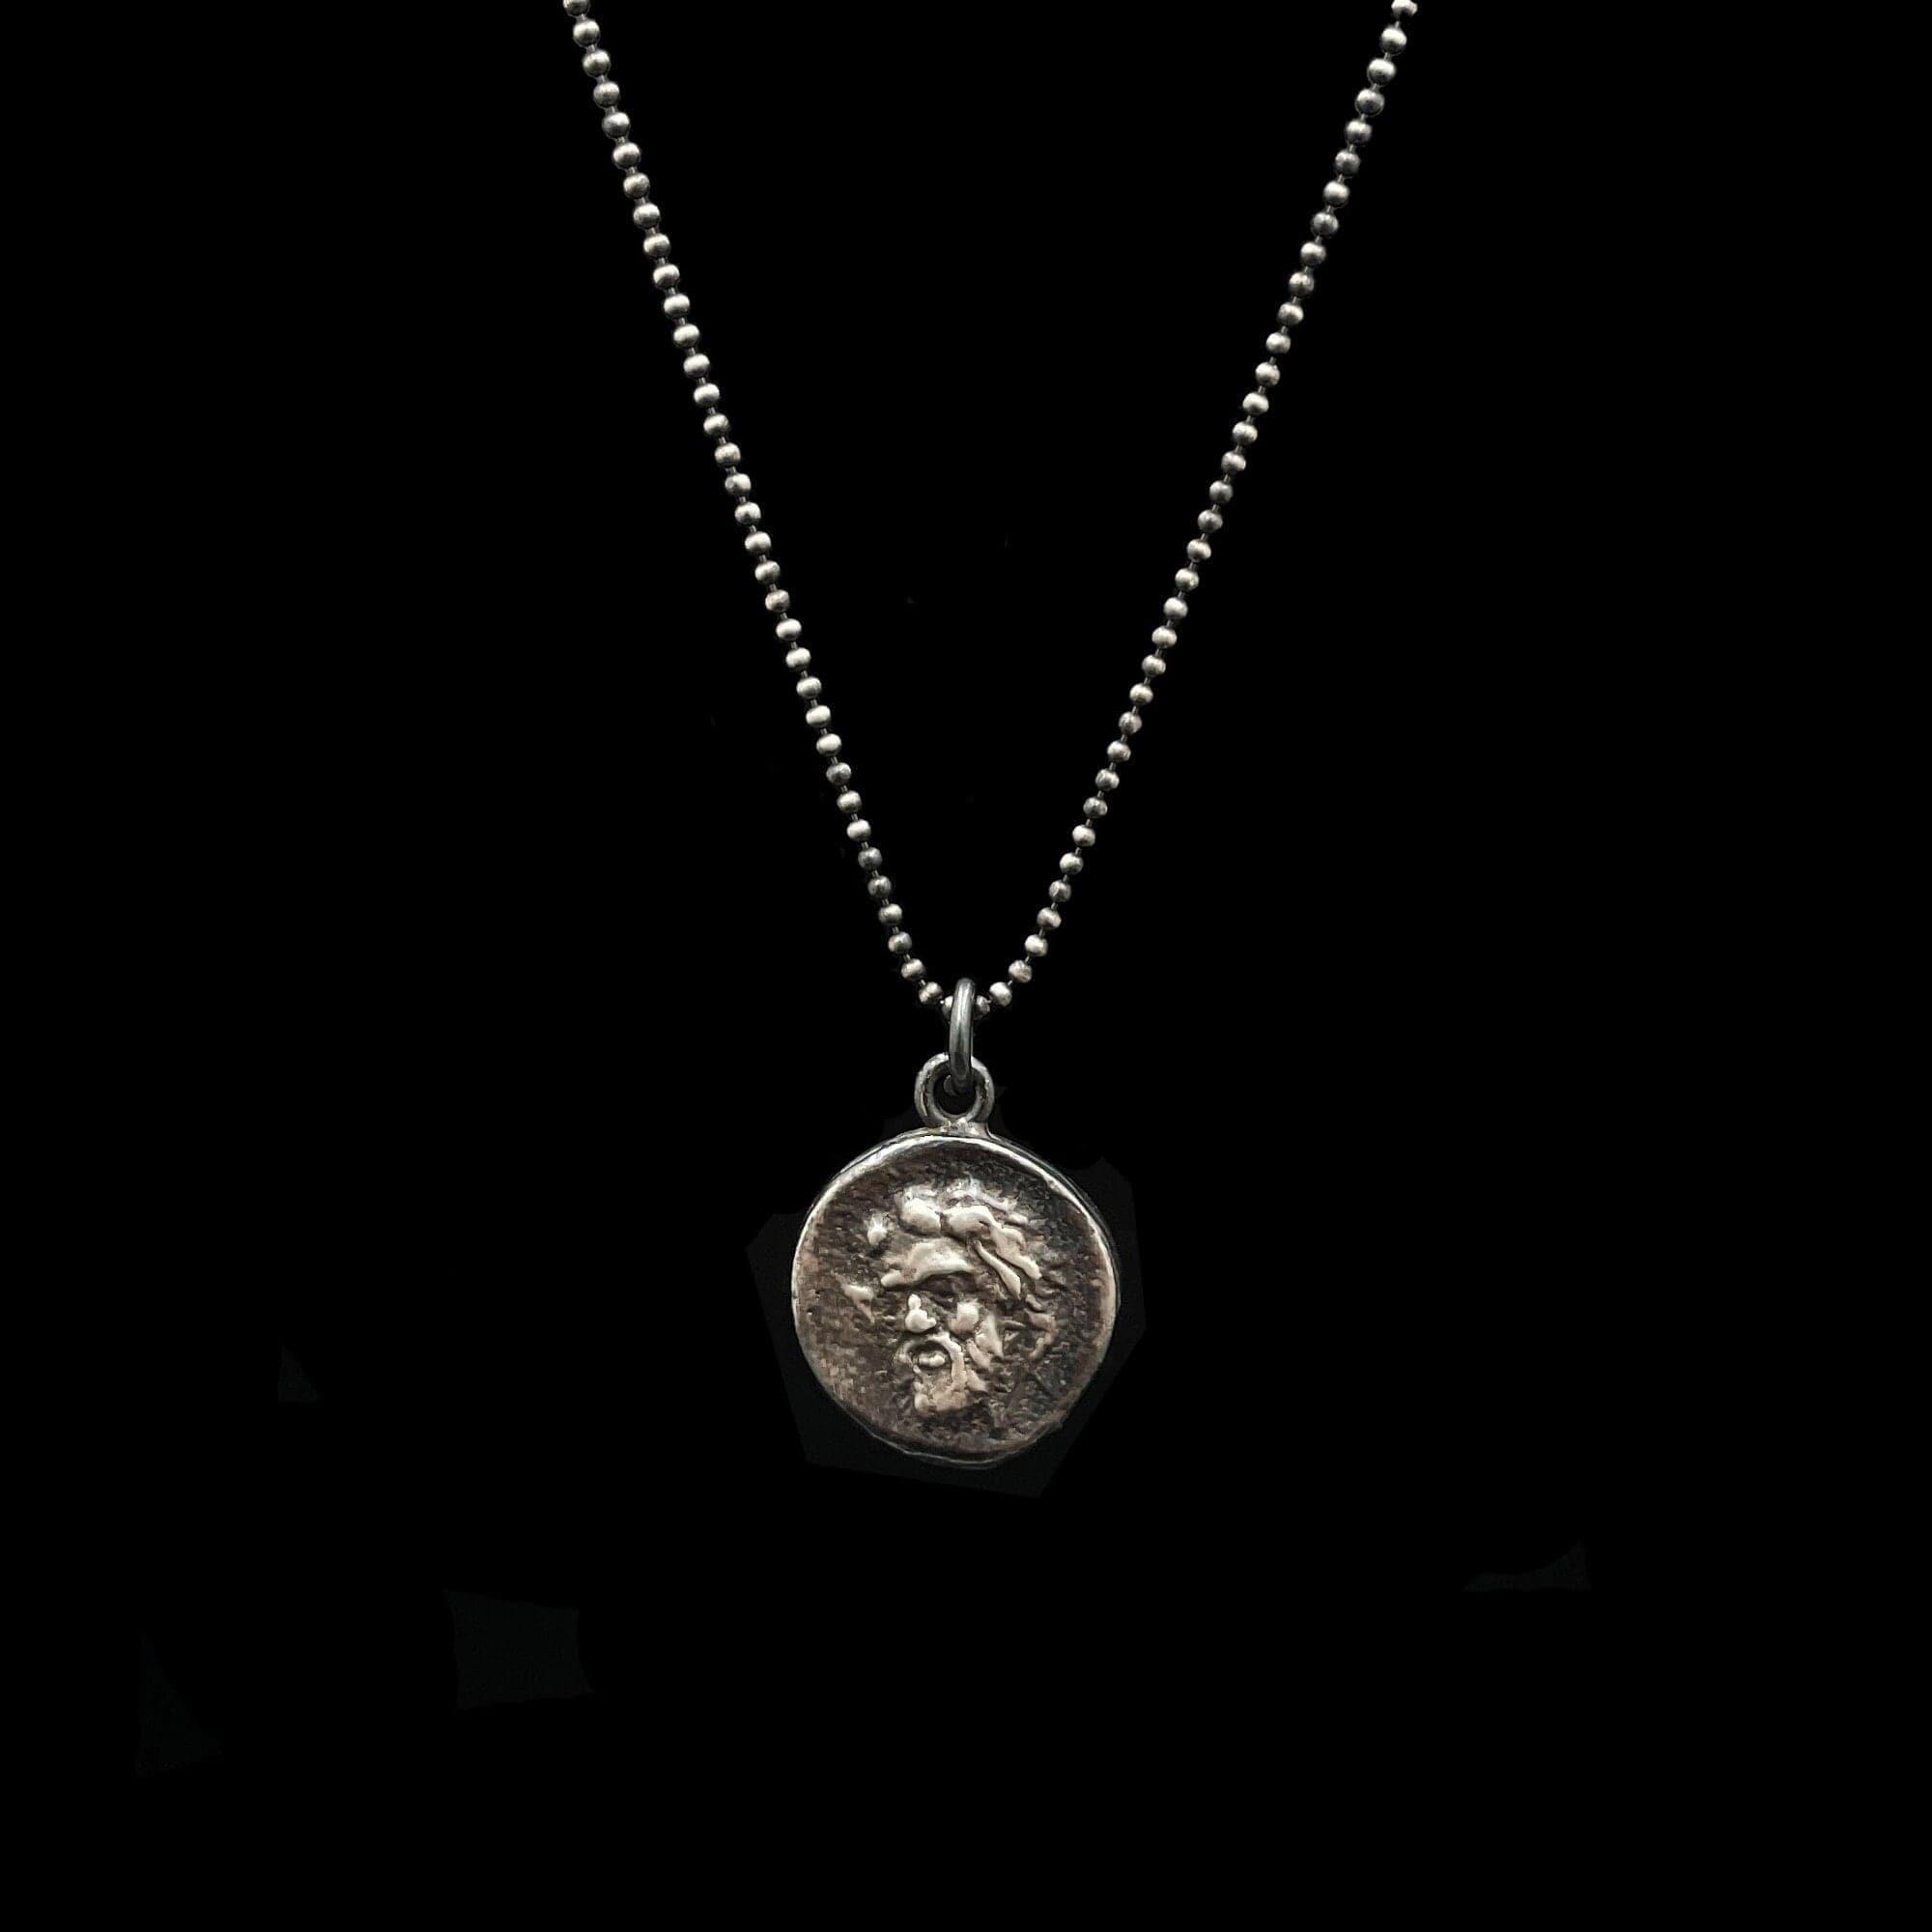 Ancient Greek Coin Necklace | Pan (God of Nature) | Museum Quality Replica Ancient Treasures Ancientreasures Viking Odin Thor Mjolnir Celtic Ancient Egypt Norse Norse Mythology